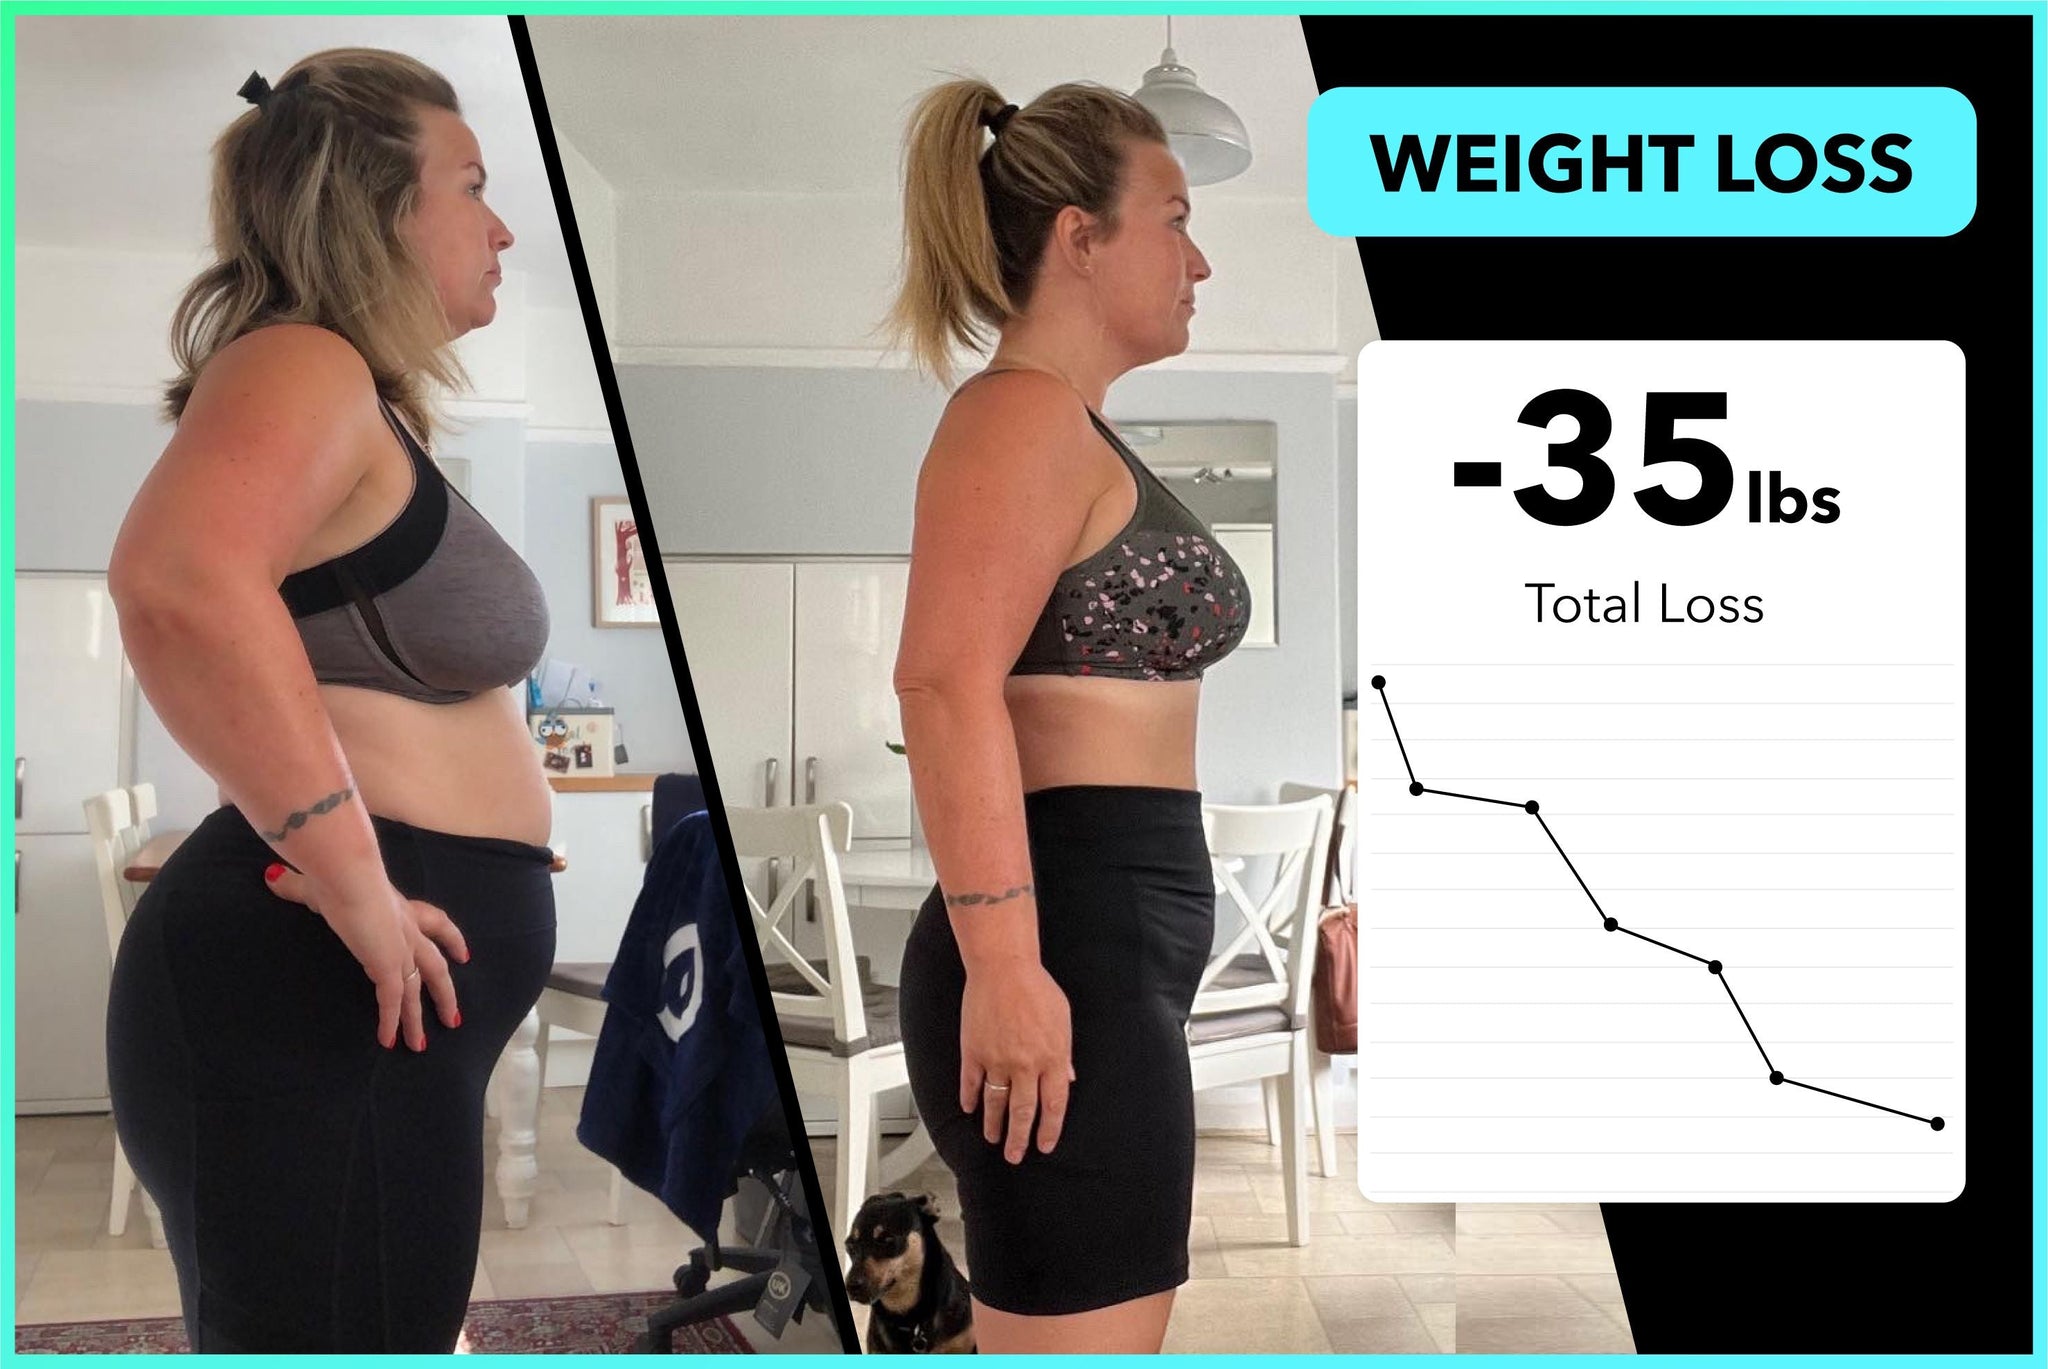 Melissa has lost 35lbs with Team RH